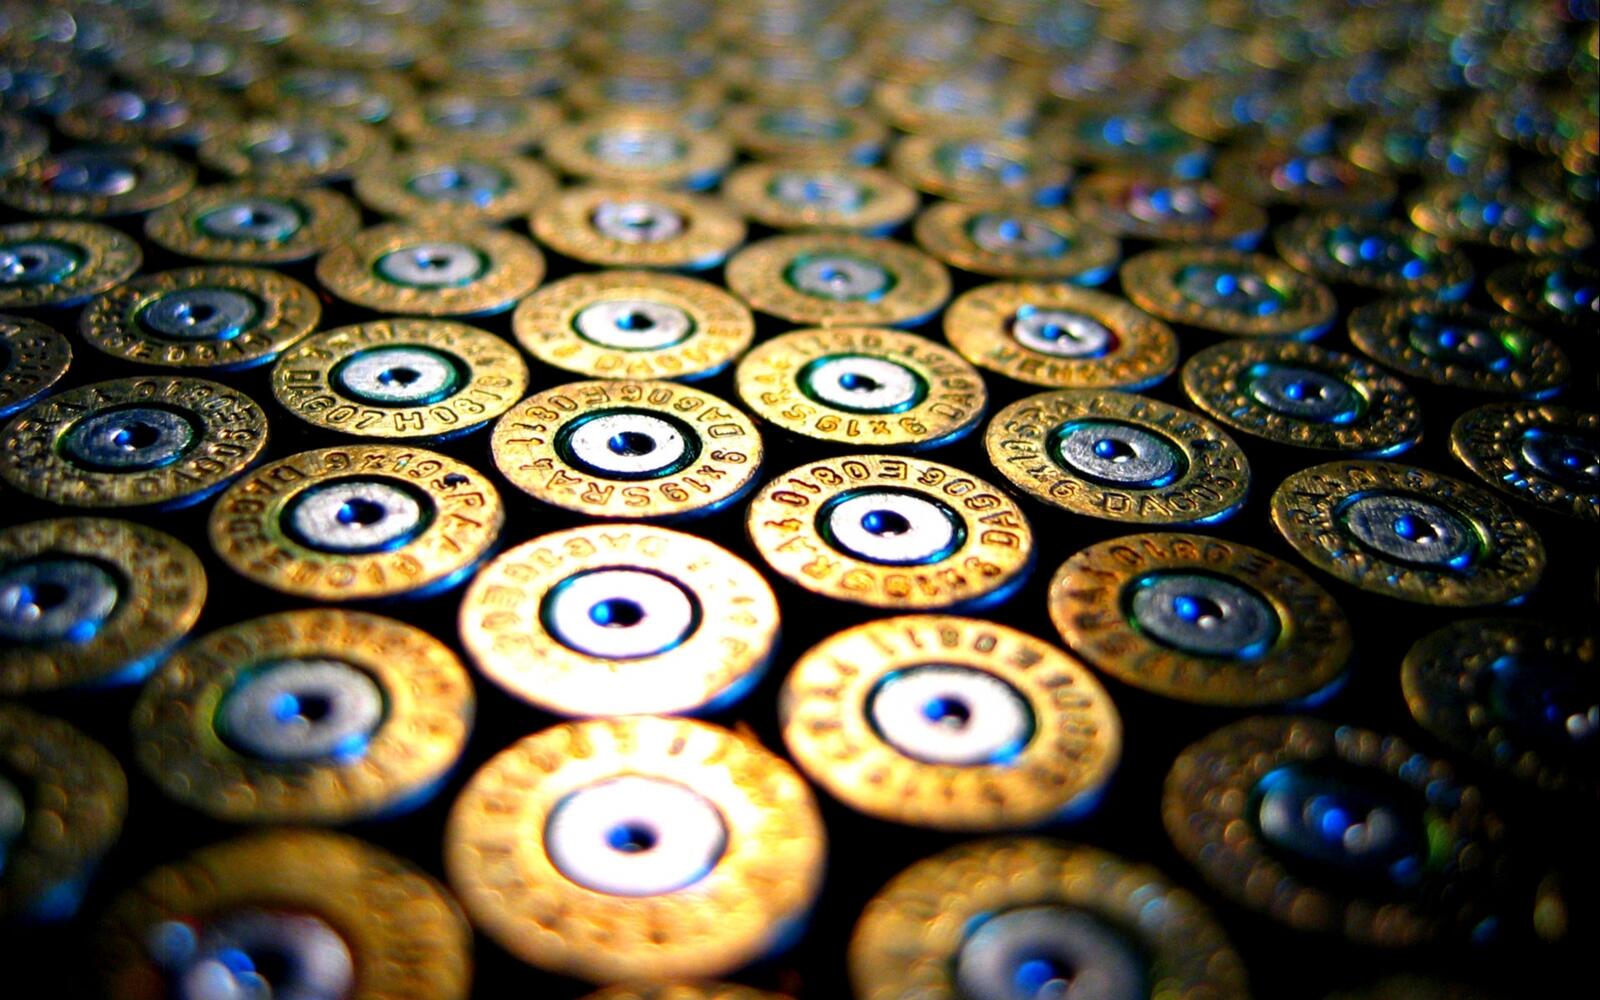 Wallpapers weapons military science ammunition on the desktop